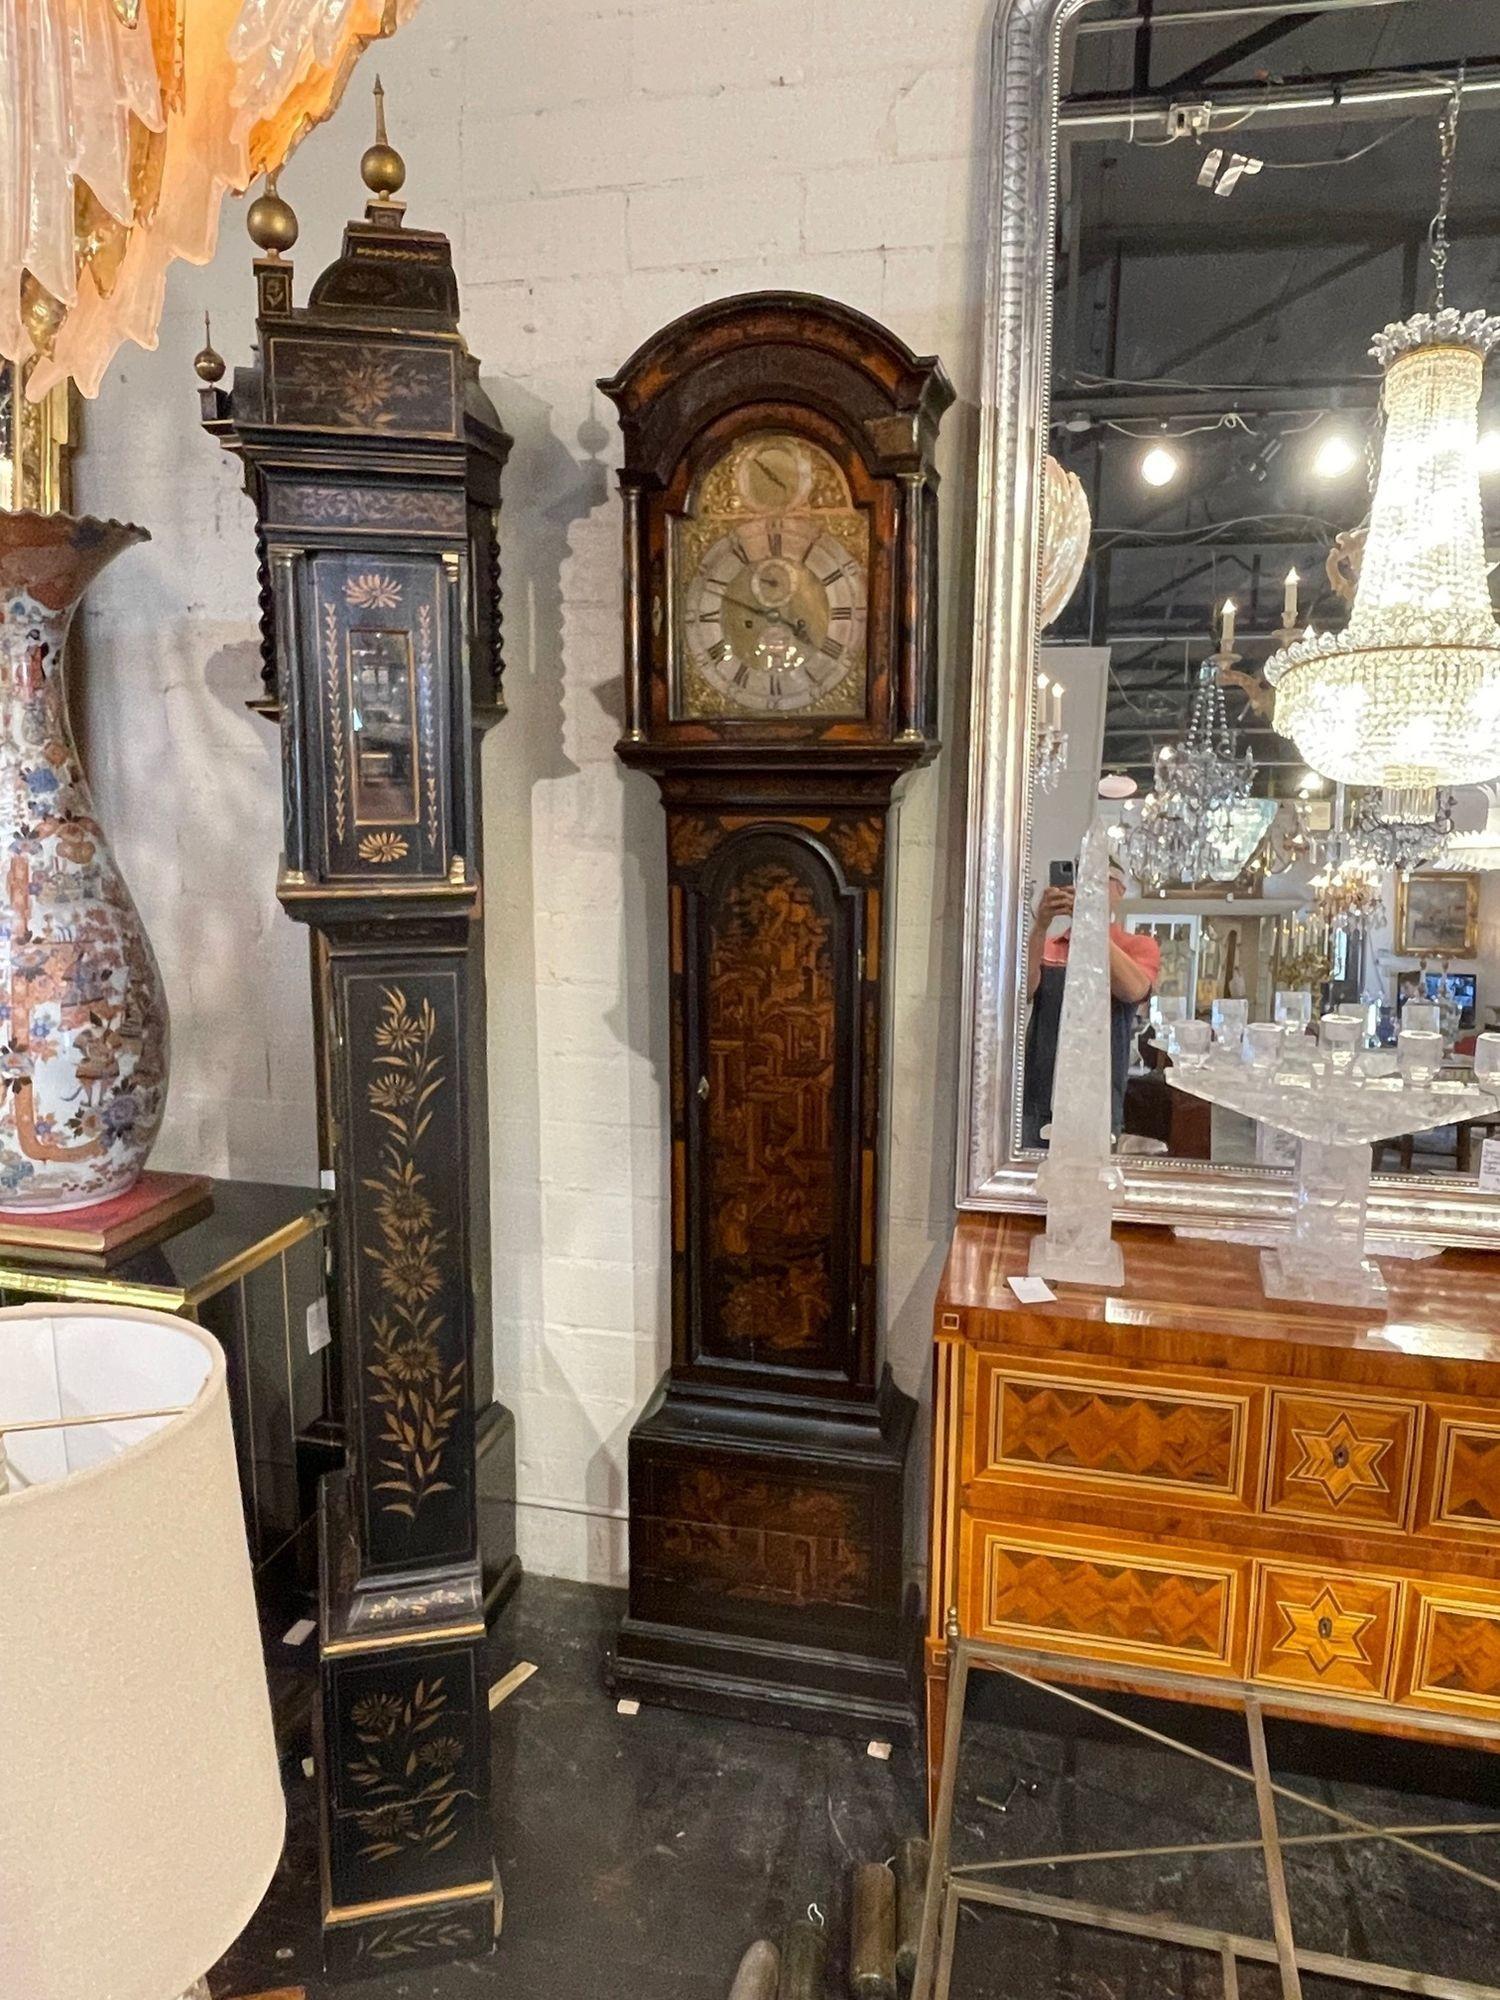 Very special 19th century Englished Chinoiserie decorated tall case clock. Featuring very pretty Asian images along with a decorative face. Gorgeous!!